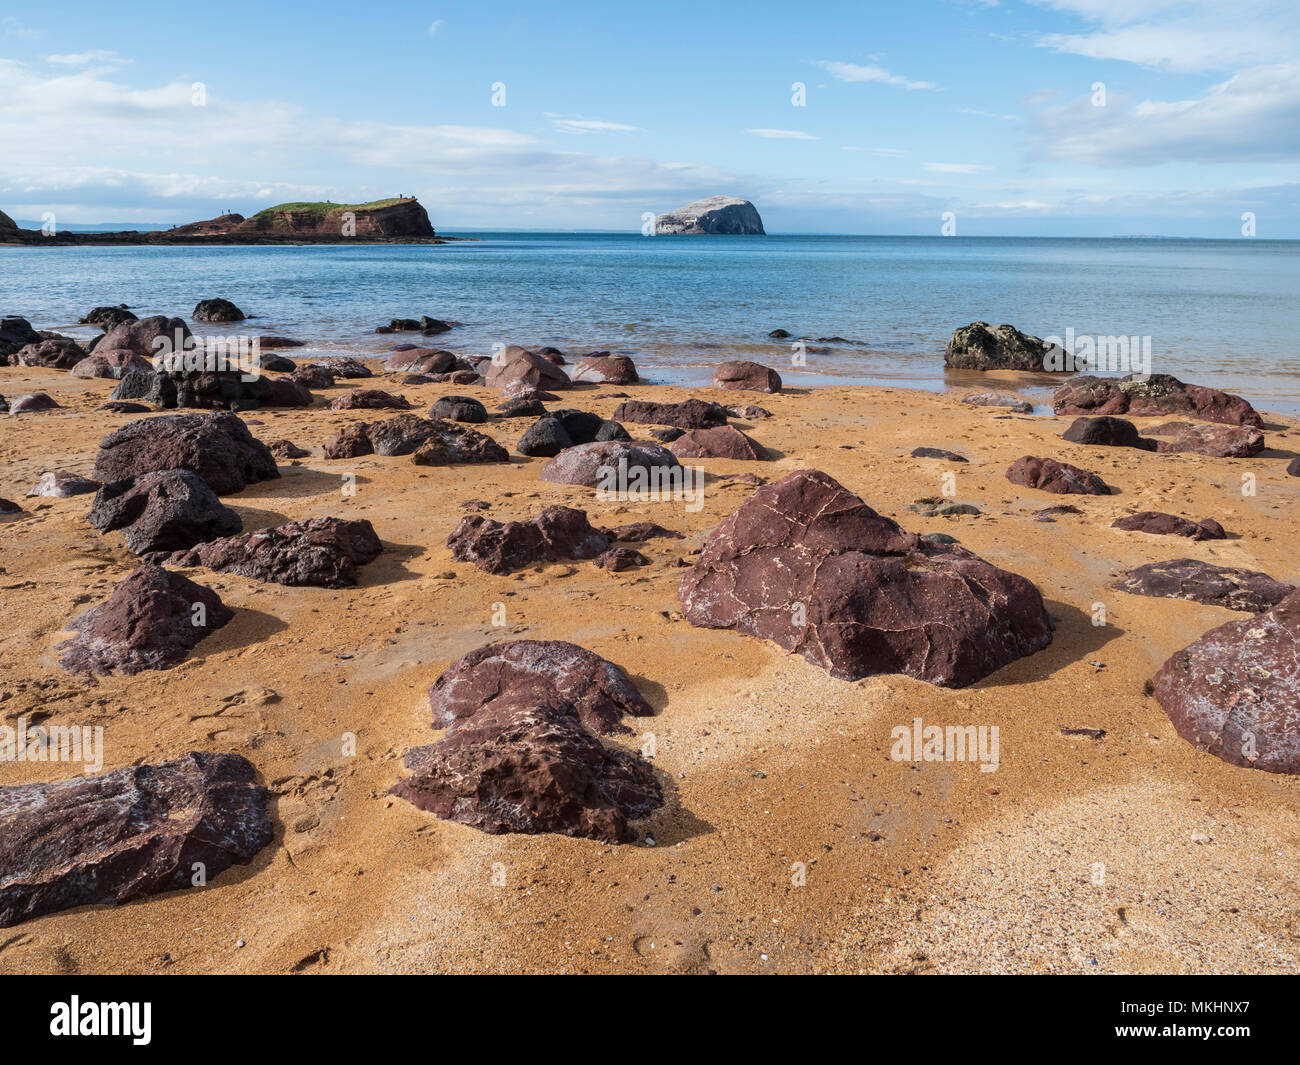 Seacliff, East Lothian, Scotland - the secret cove and location of one of the world's smallest harbours. Rock formations on the beach. Stock Photo